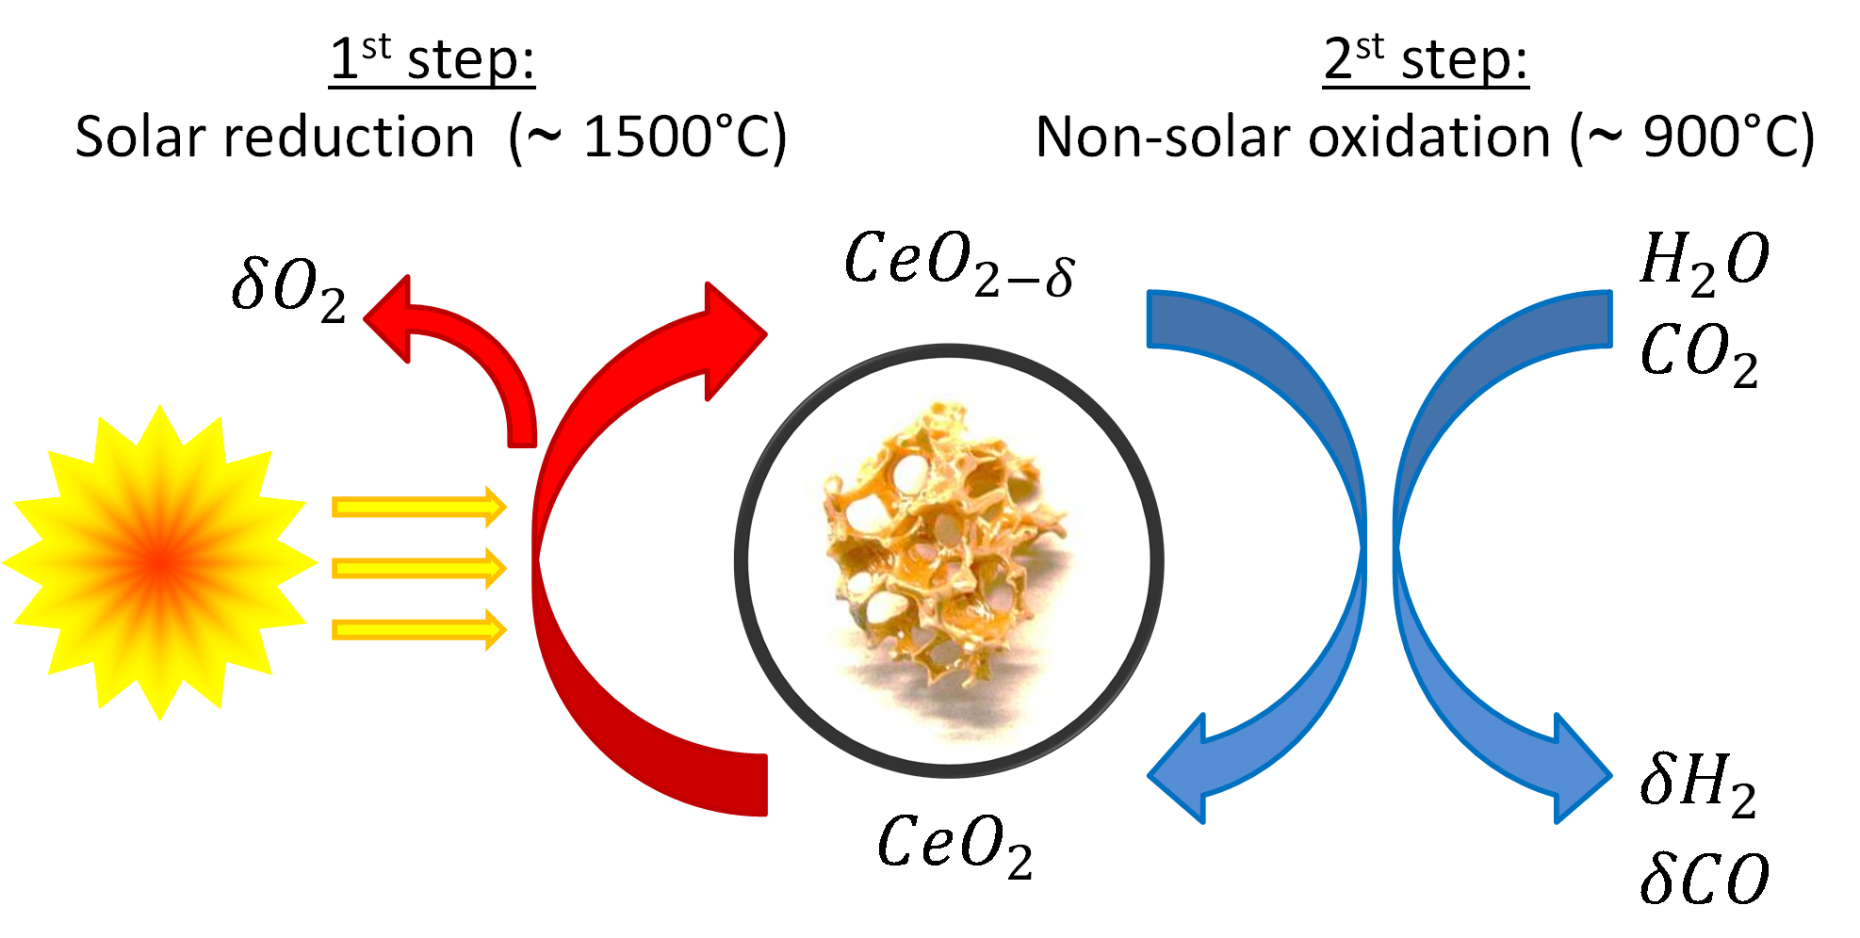 Schematic of the 2-step solar thermochemical cycle for splitting H2O and CO2 using ceria-based redox reactions.